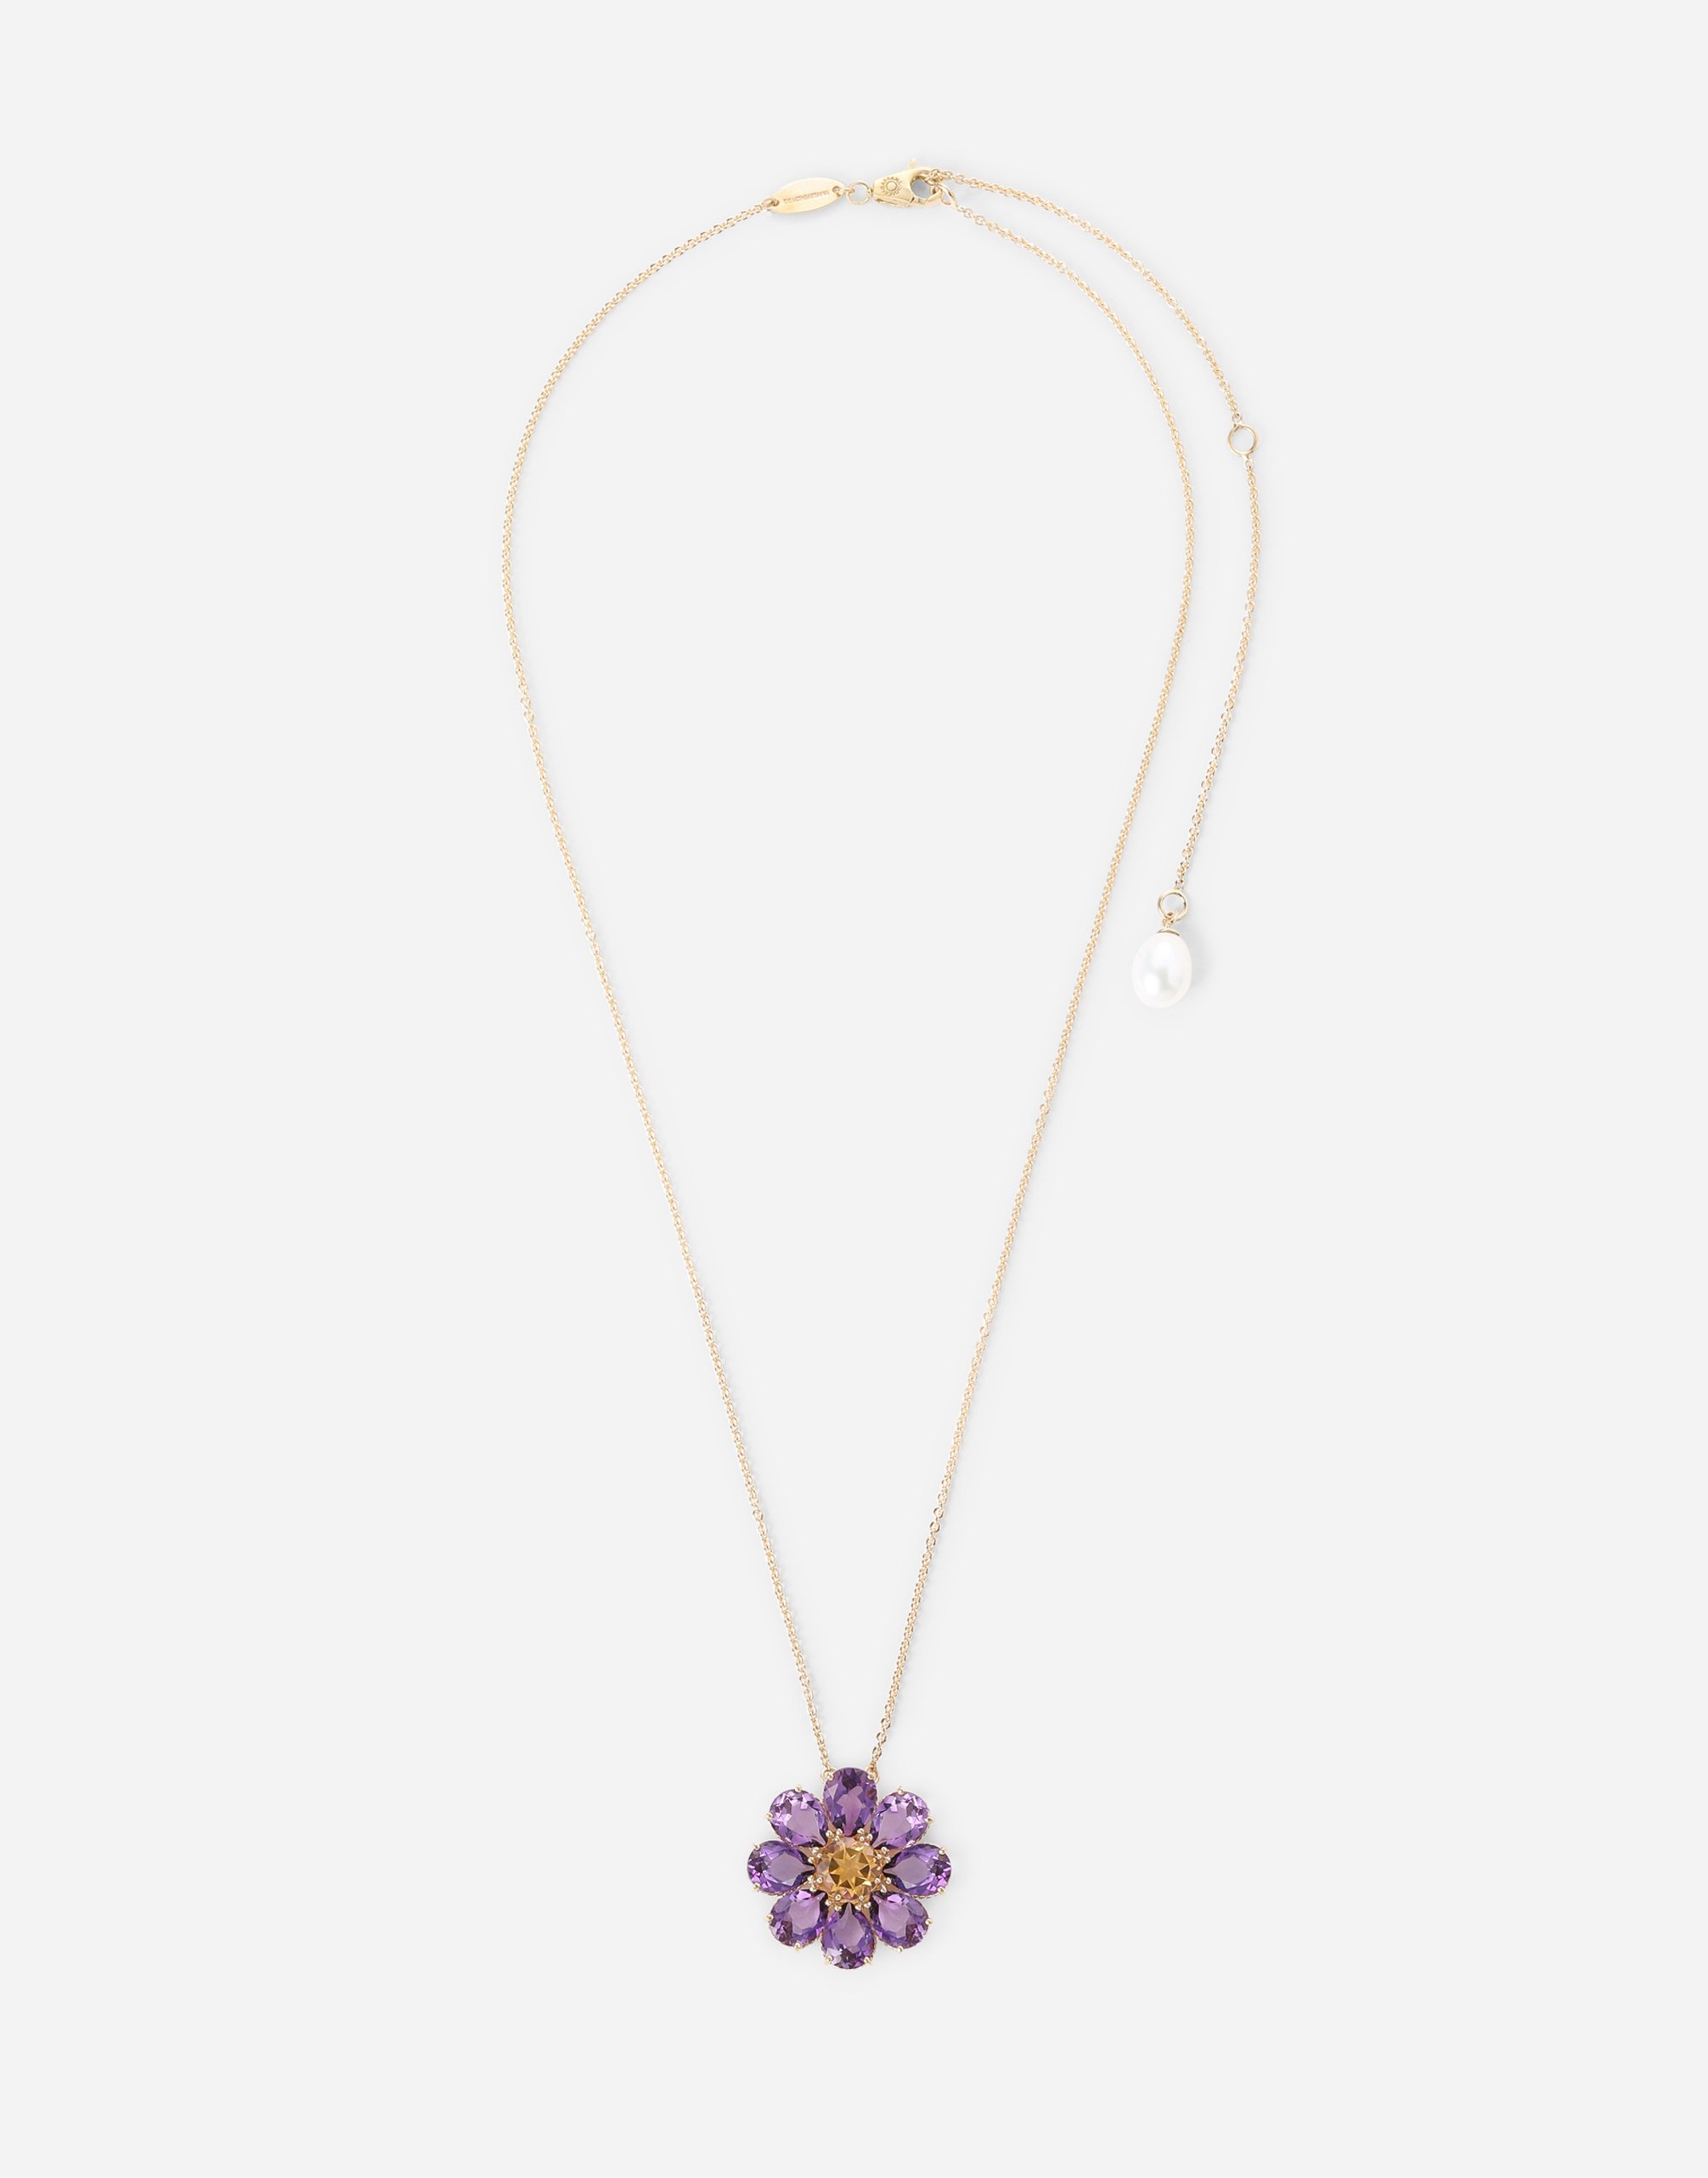 Spring necklace in yellow 18kt gold with amethyst floral motif in Gold